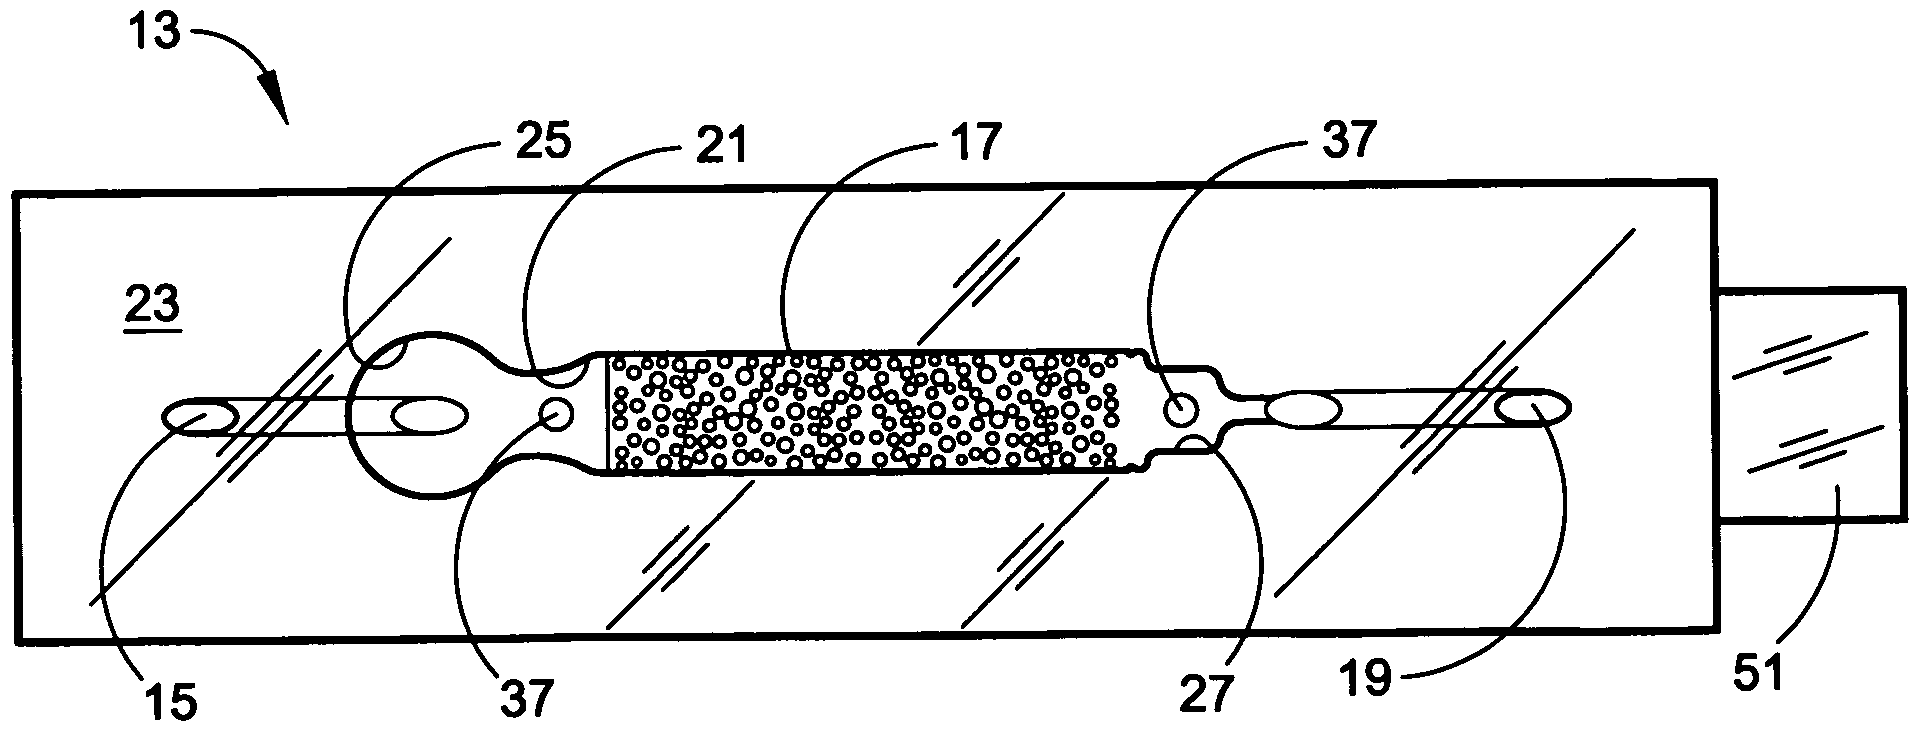 Device for cell separation and analysis and method of using